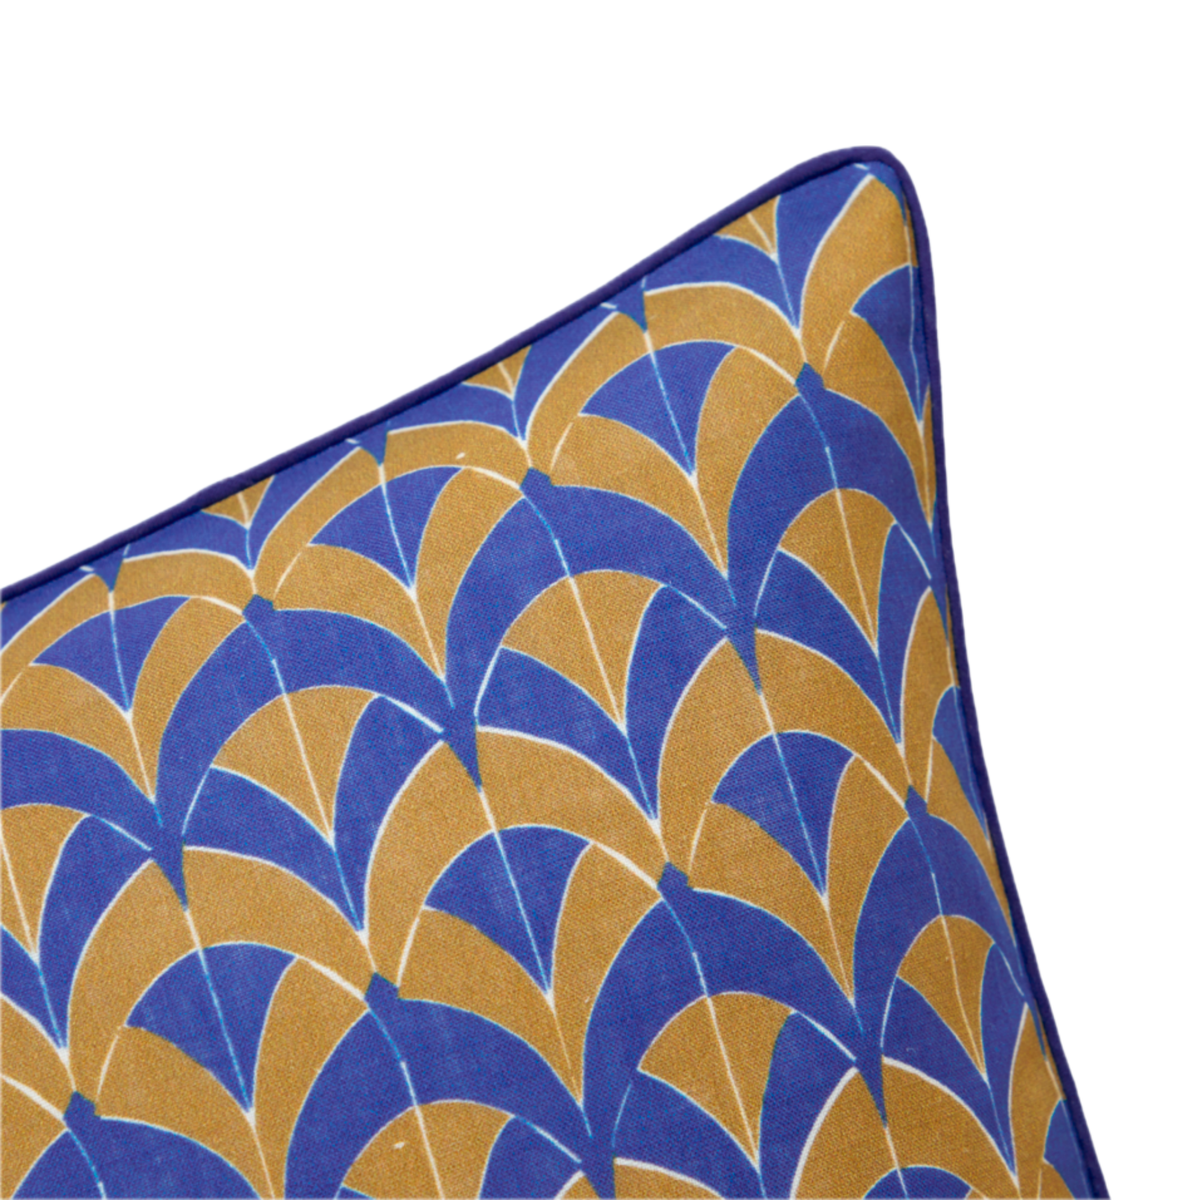 Corner of Yves Delorme Canopée Decorative Pillow